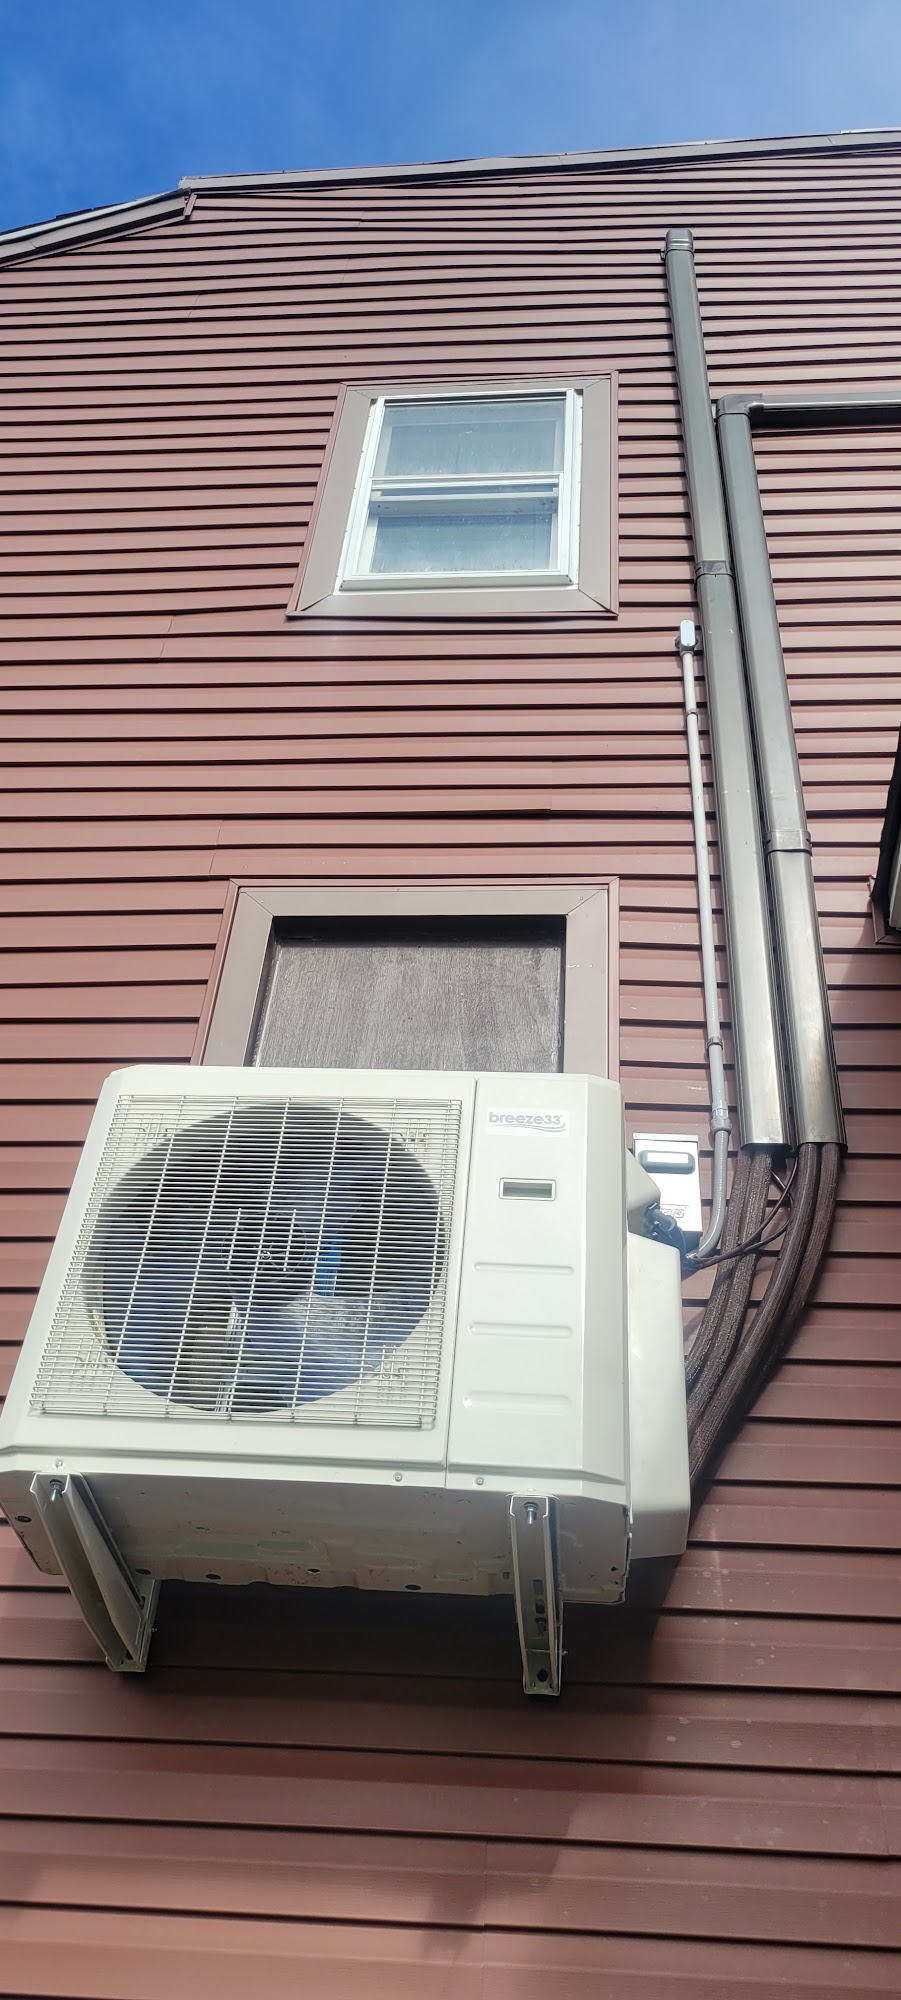 Ayers heating and cooling 222 Prospect St, Girard Pennsylvania 16417